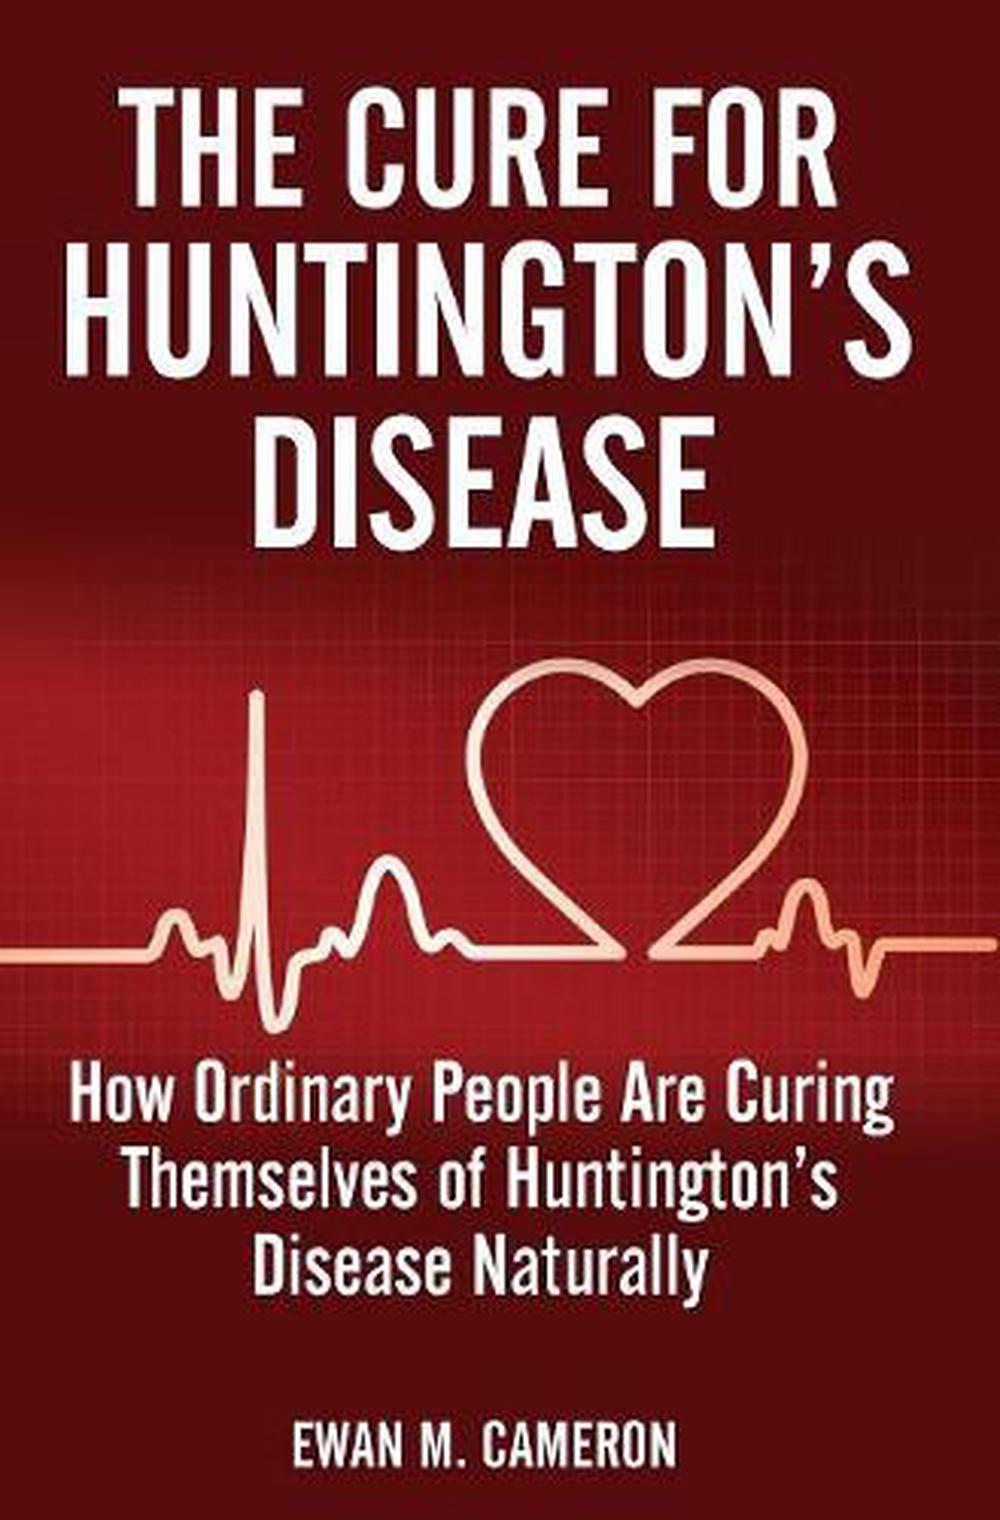 The Cure for Huntington's Disease by Ewan M. Cameron Hardcover Book